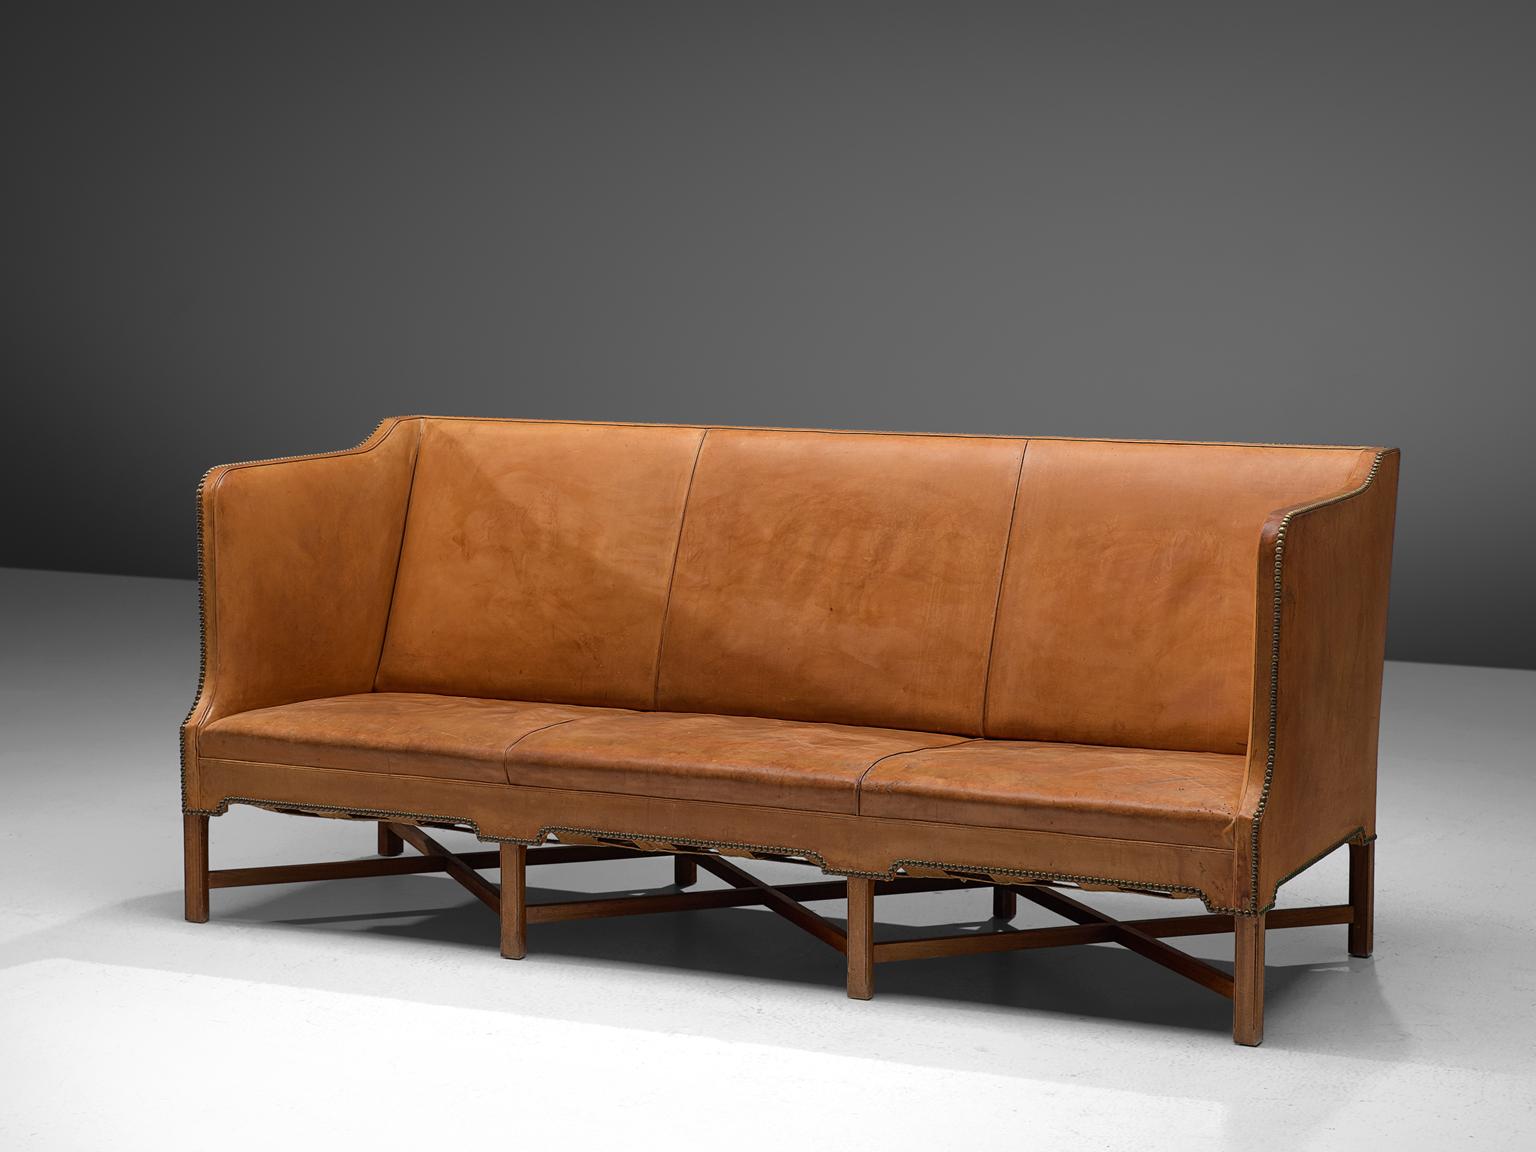 Kaare Klint for Rud Rasmussen, sofa model 4118, original leather and mahogany, Denmark, 1929.

Classic and elegant Scandinavian three-seater sofa model 4118 by Kaare Klint. This model was designed in 1929. The base consists of eight legs in